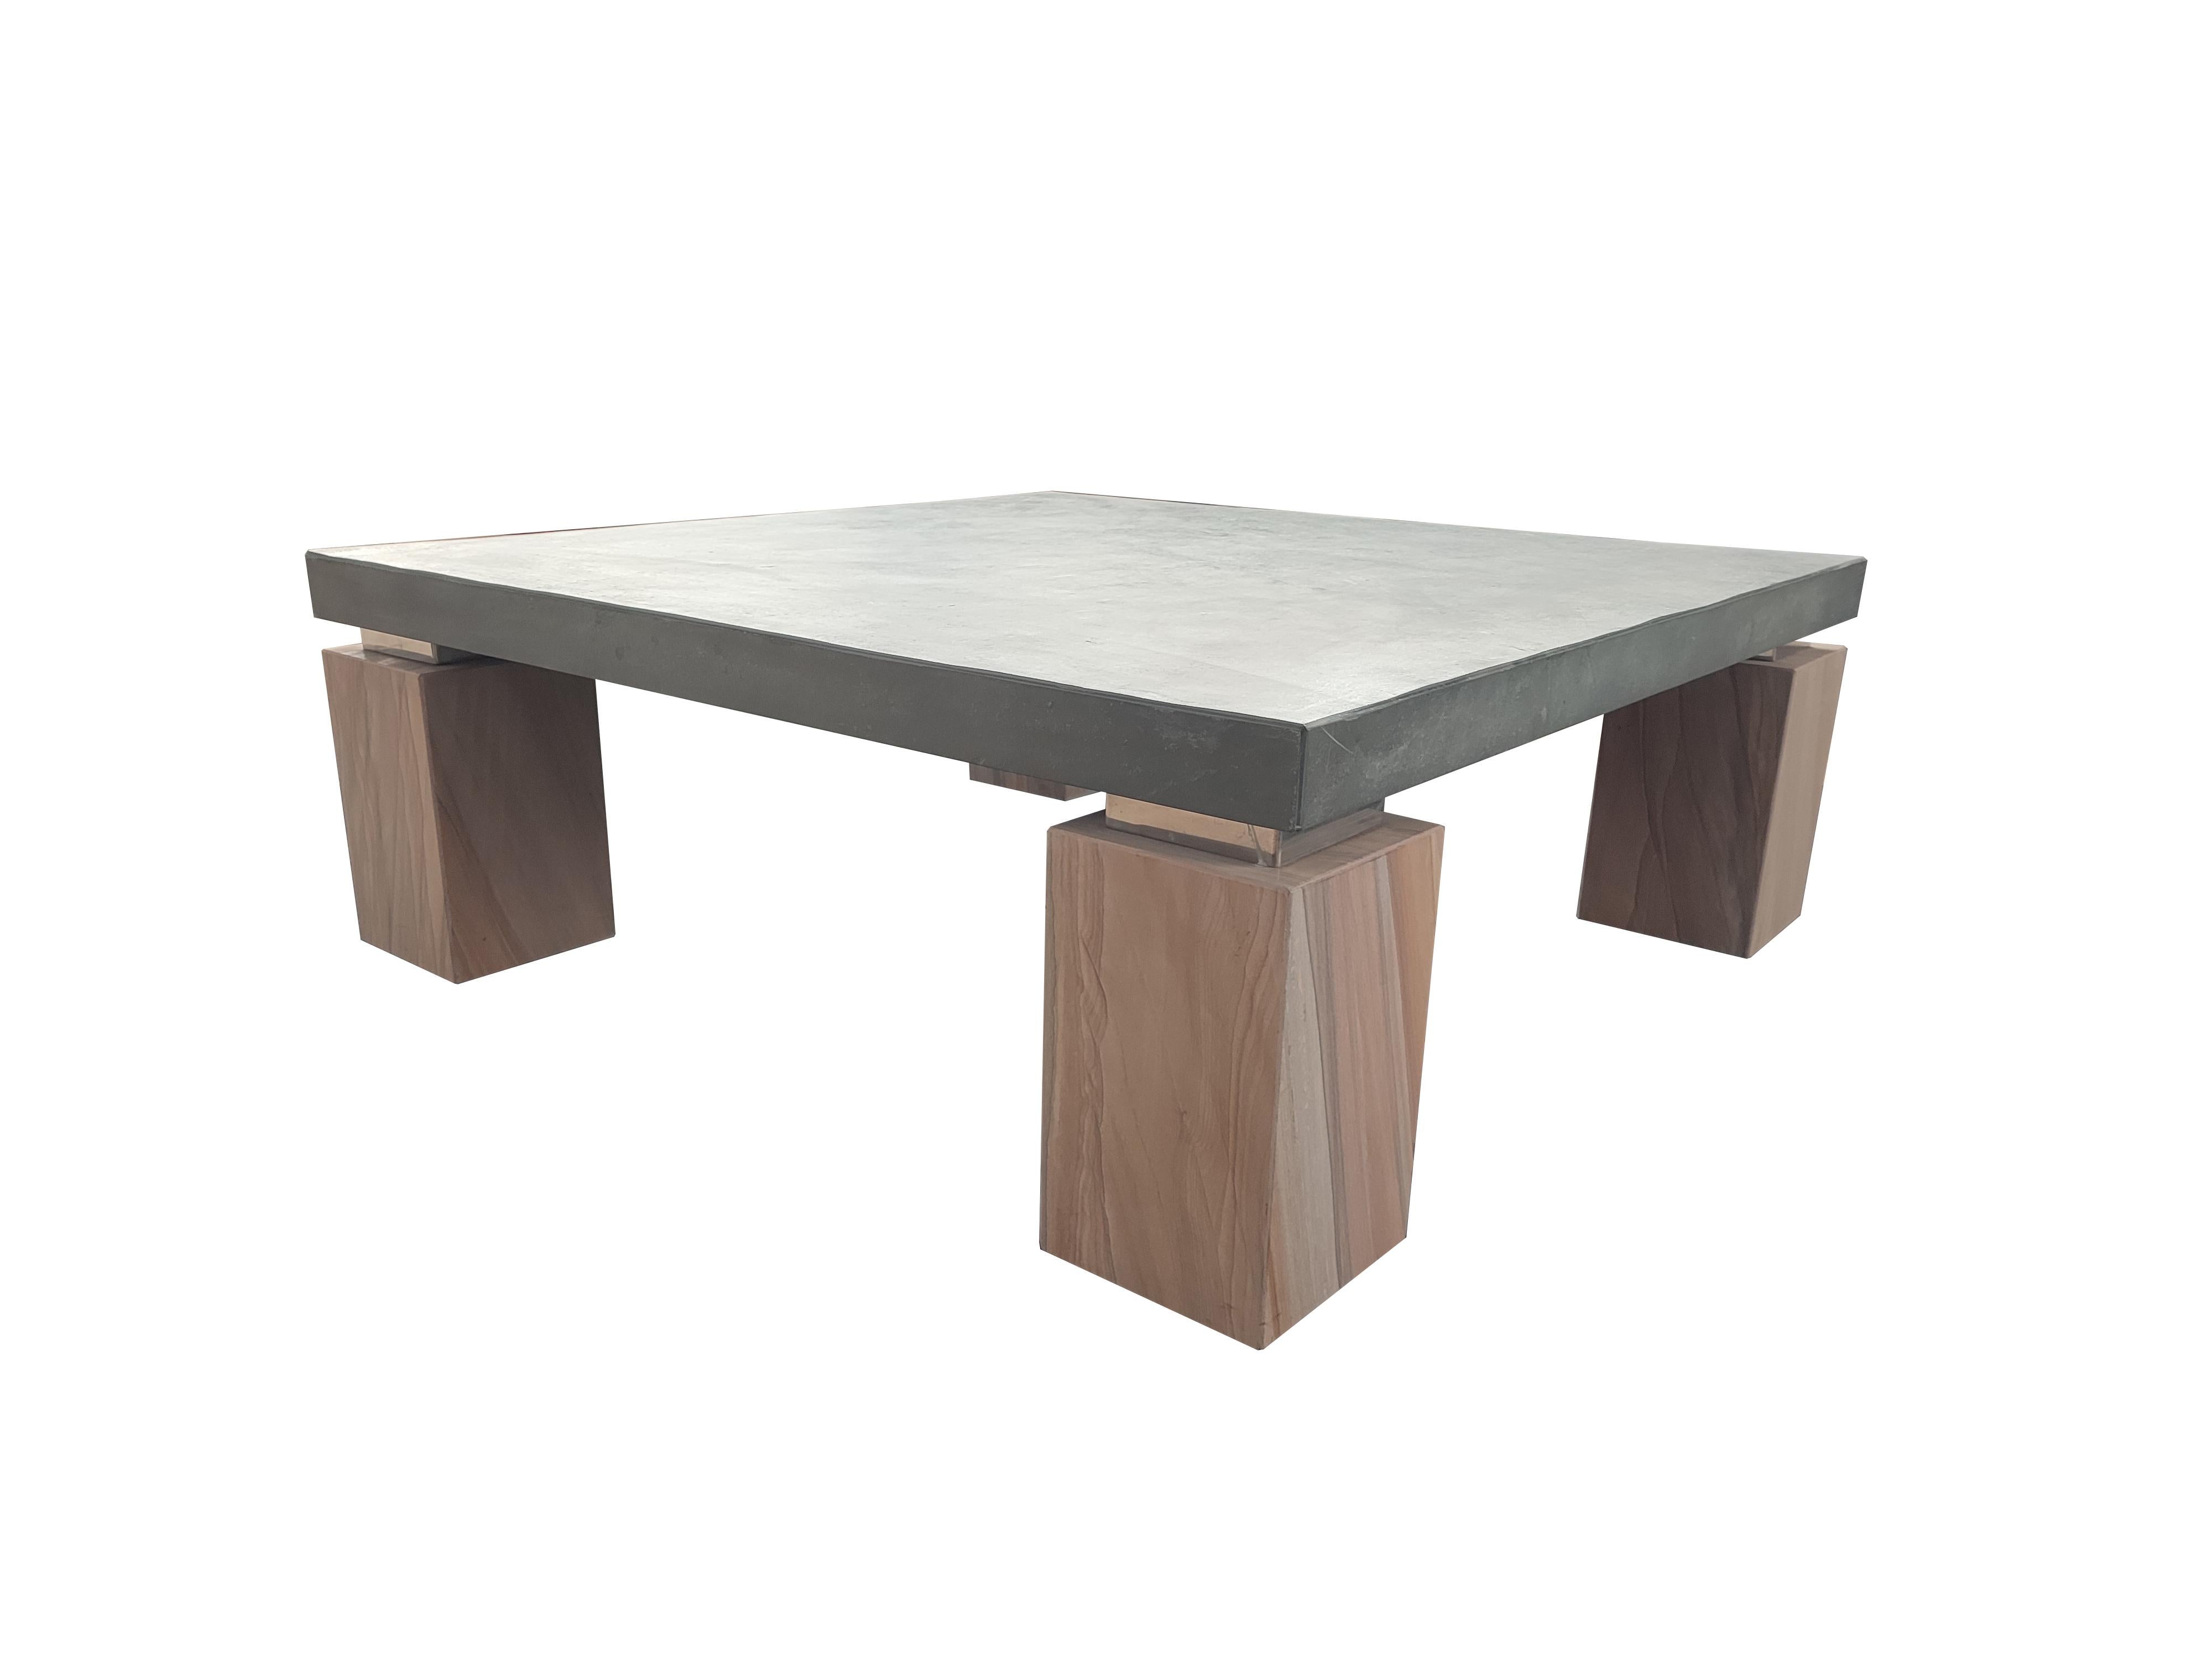 MOTALA Black Slate, Steel & Sandstone Marble Table Modern Design In Stock Spain
The Motala coffee table is an original piece in stock of the Spanish brand of high-end designer furniture in marble and natural stone Meddel. The structure of the Motala